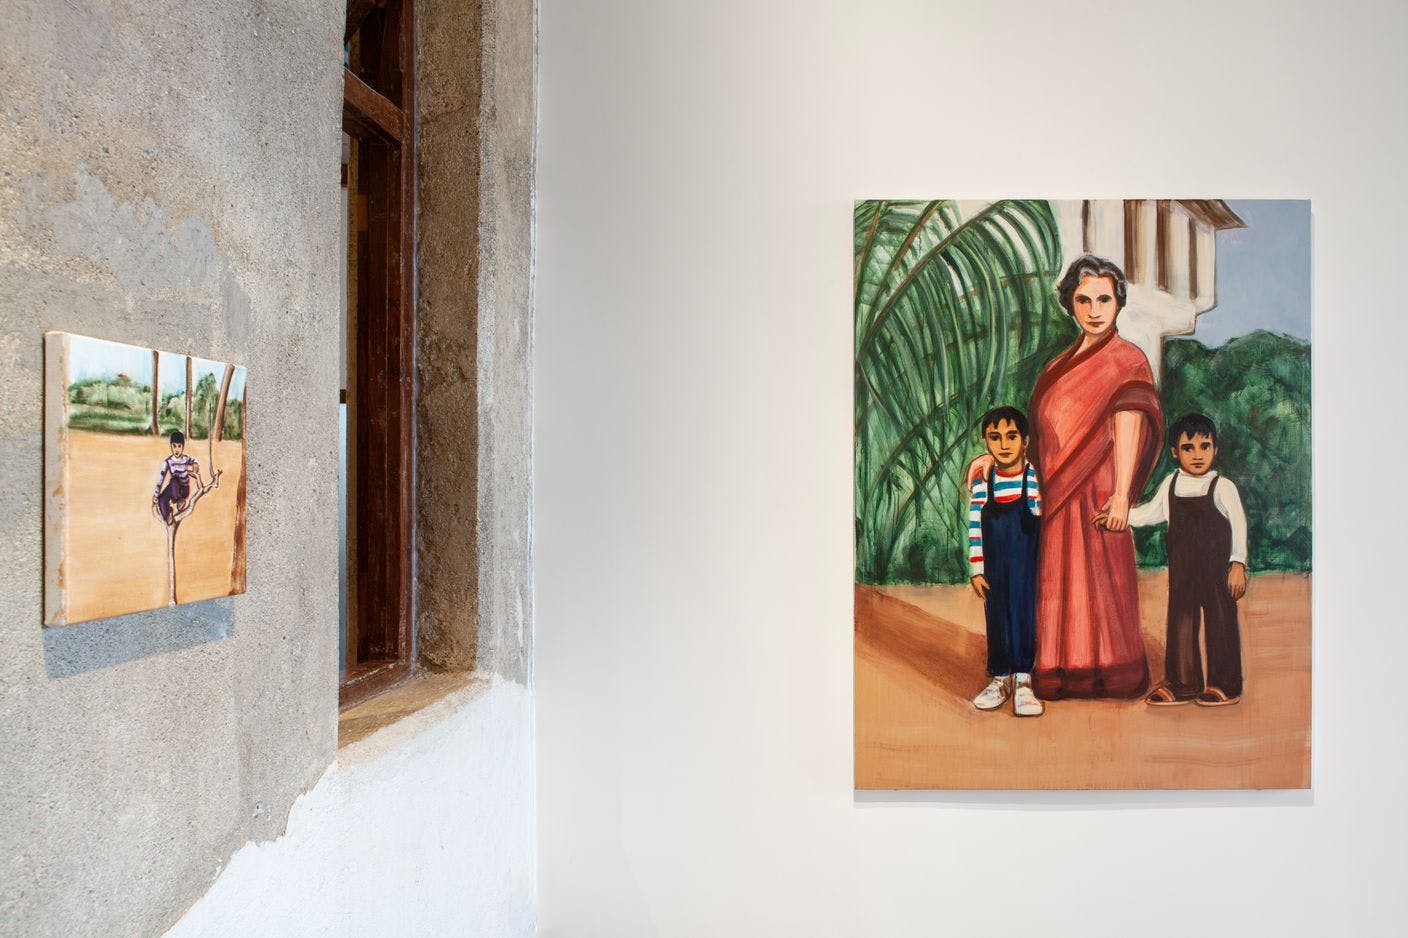 Exhibition view of two figurative paintings. The first on the left features a young boy perched on a tree and the painting on the right features two young brown boys posing with an older white woman. 